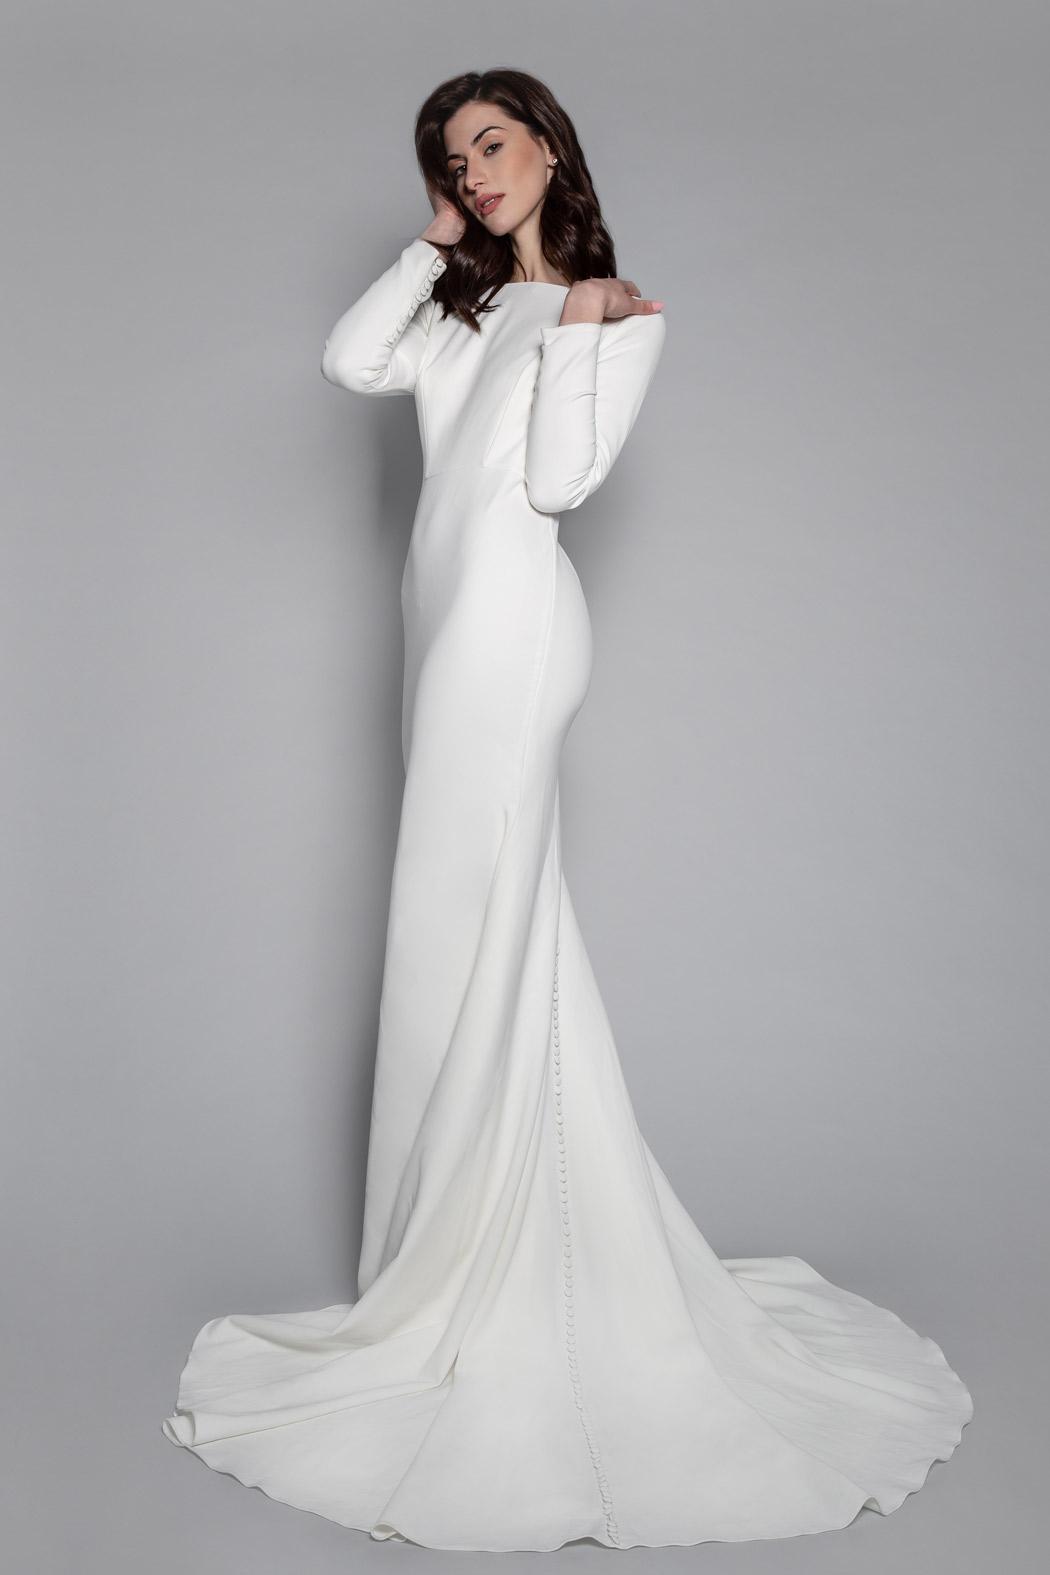 NY Bridal Designer Offers Winter Wedding Dresses That Will Warm You Right Up